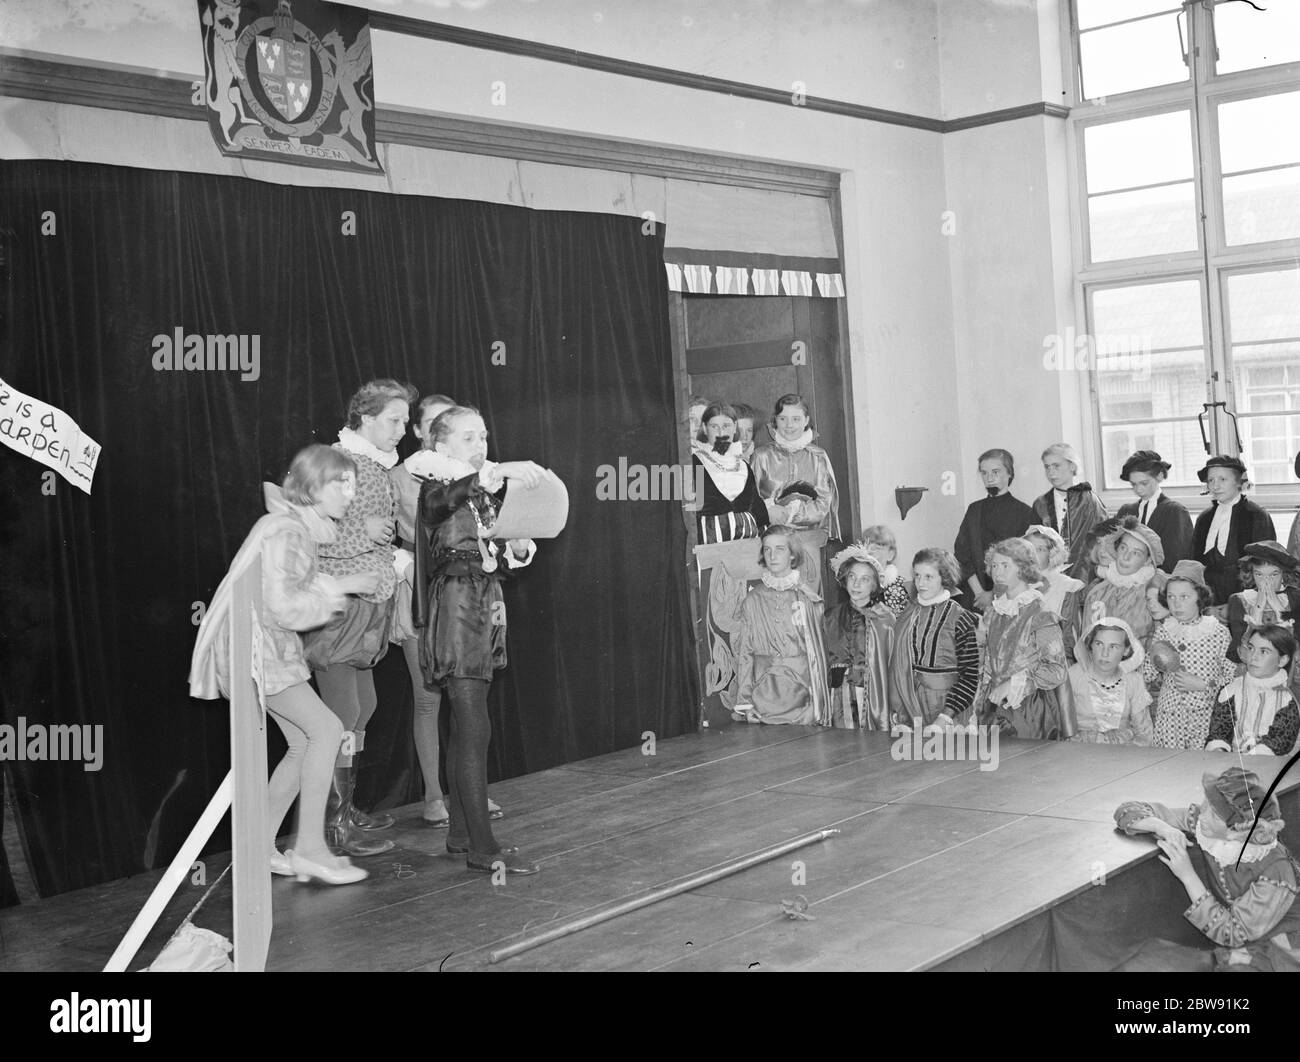 The Elizabethan pageant at Westwood Central School in Bexley , London . 1939 Stock Photo